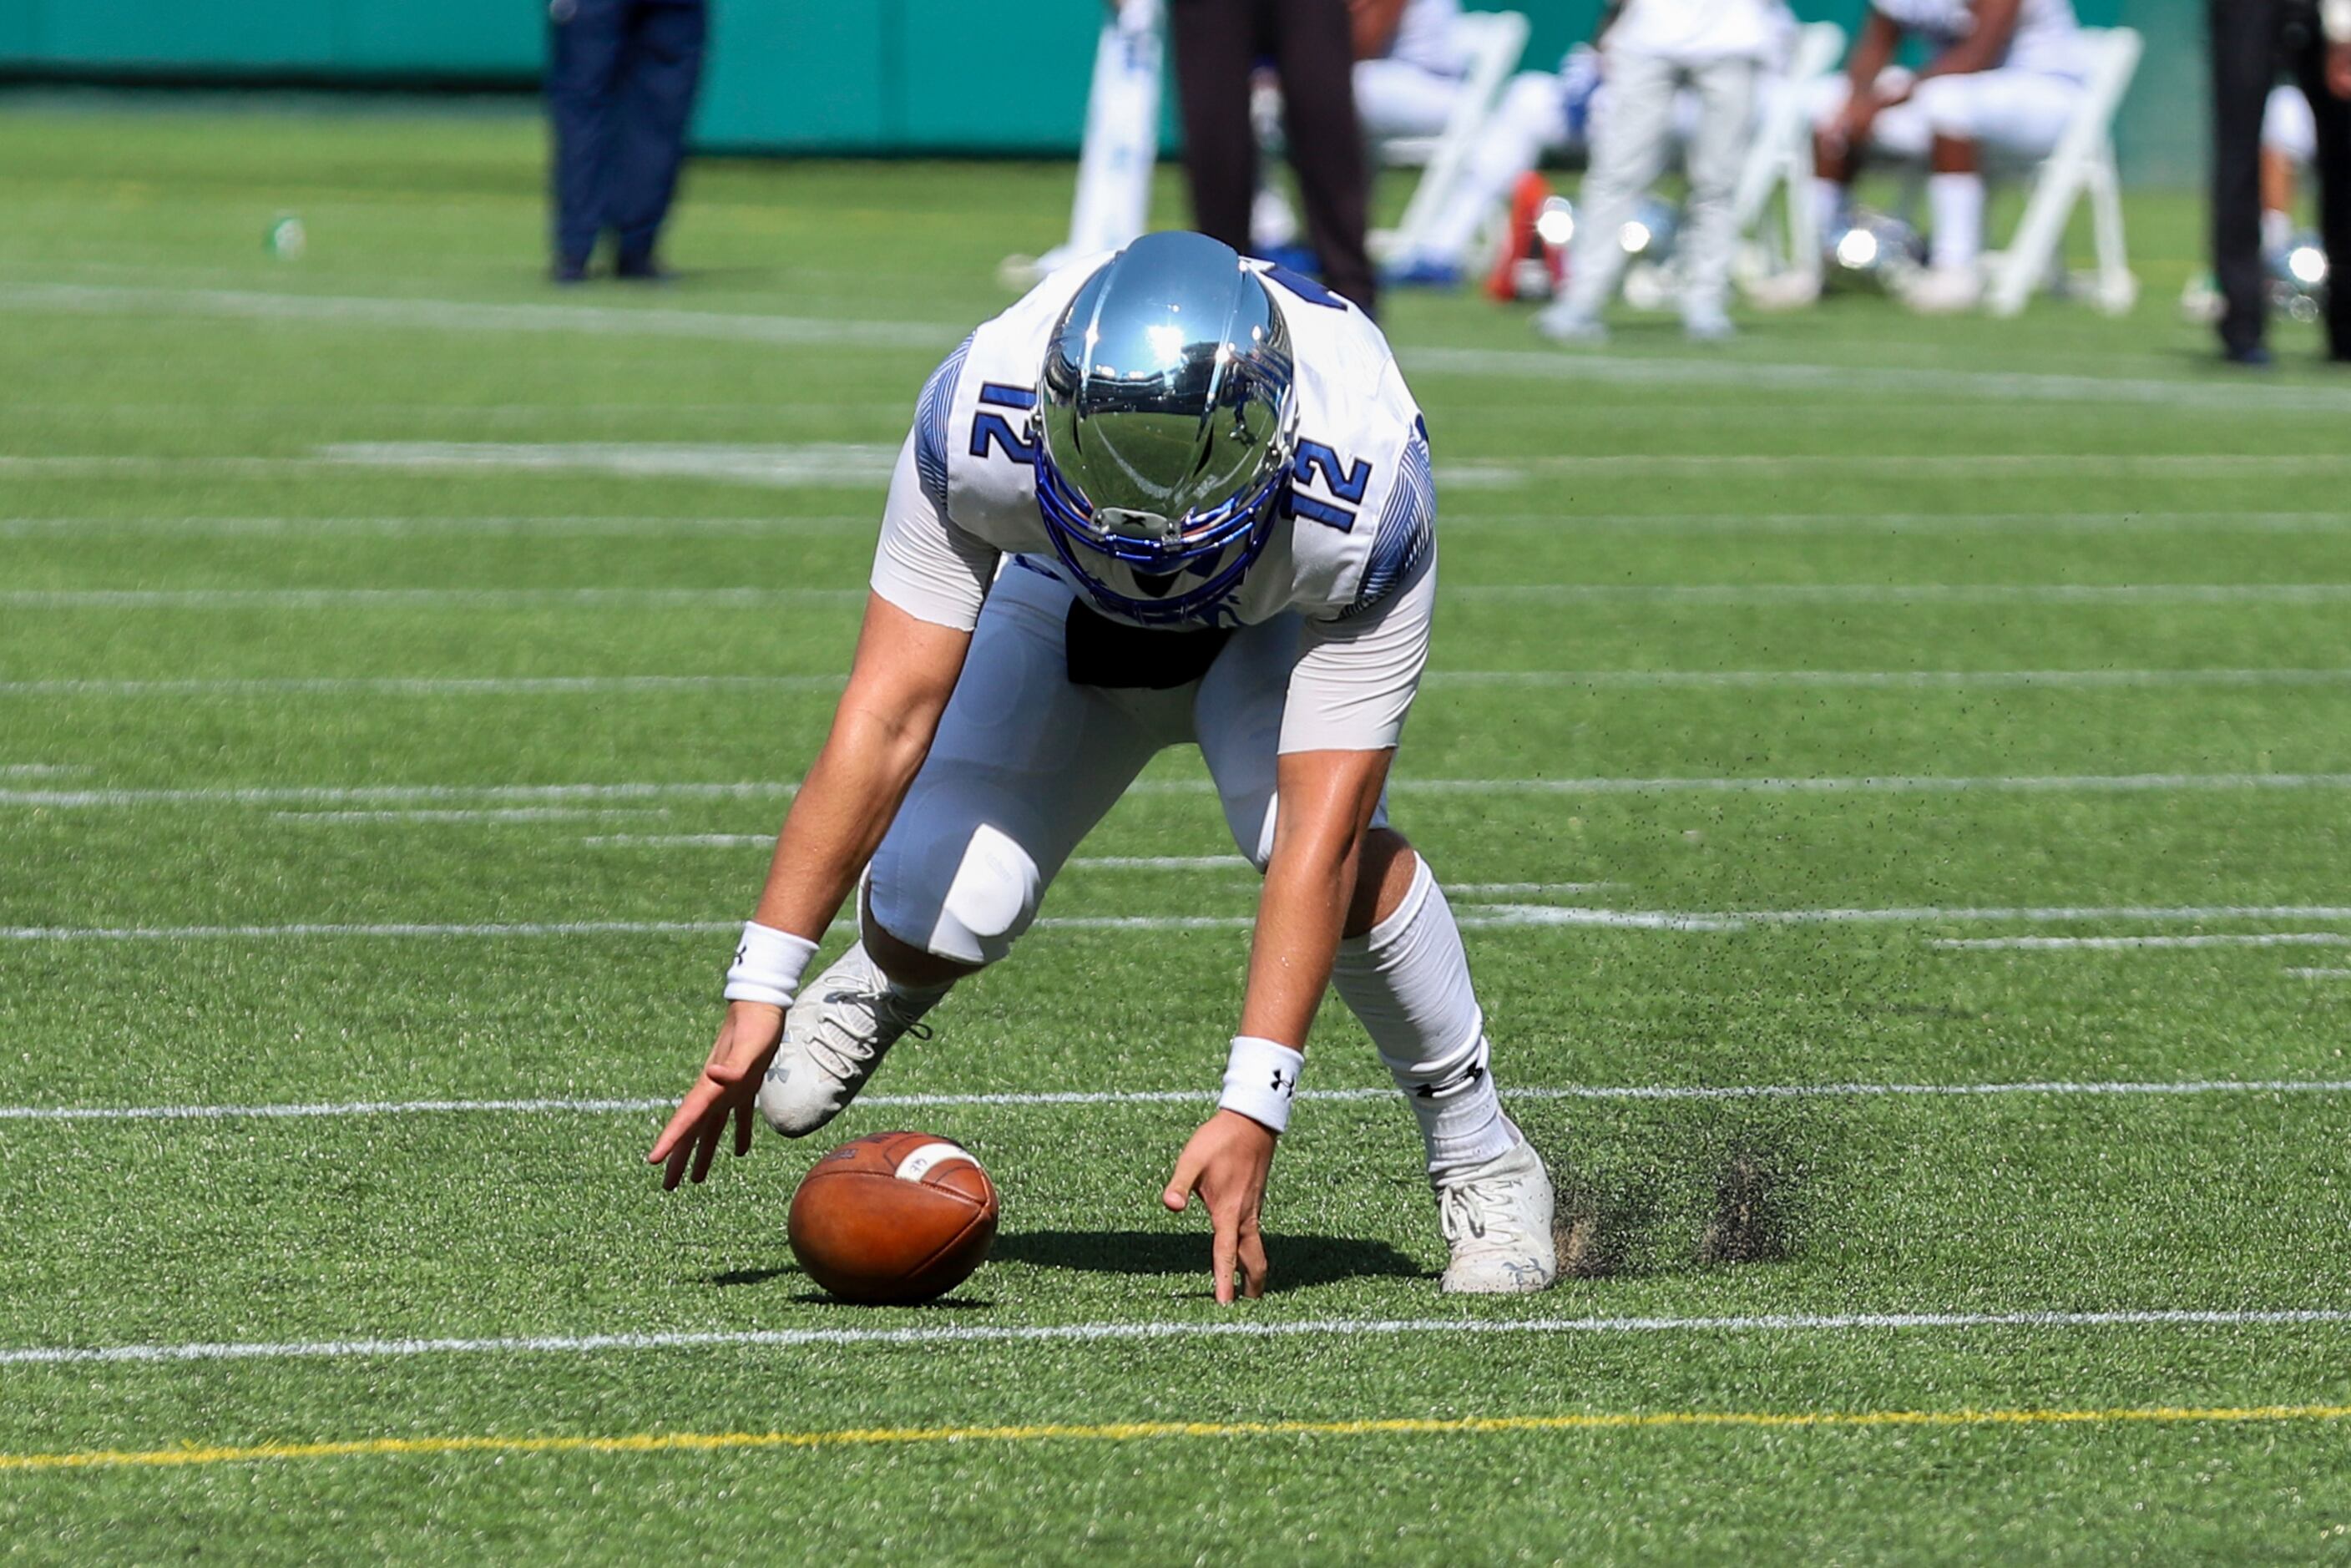 IMG Academy quarterback Jackson Woche (12) recovers a fumble against Duncanville during the...